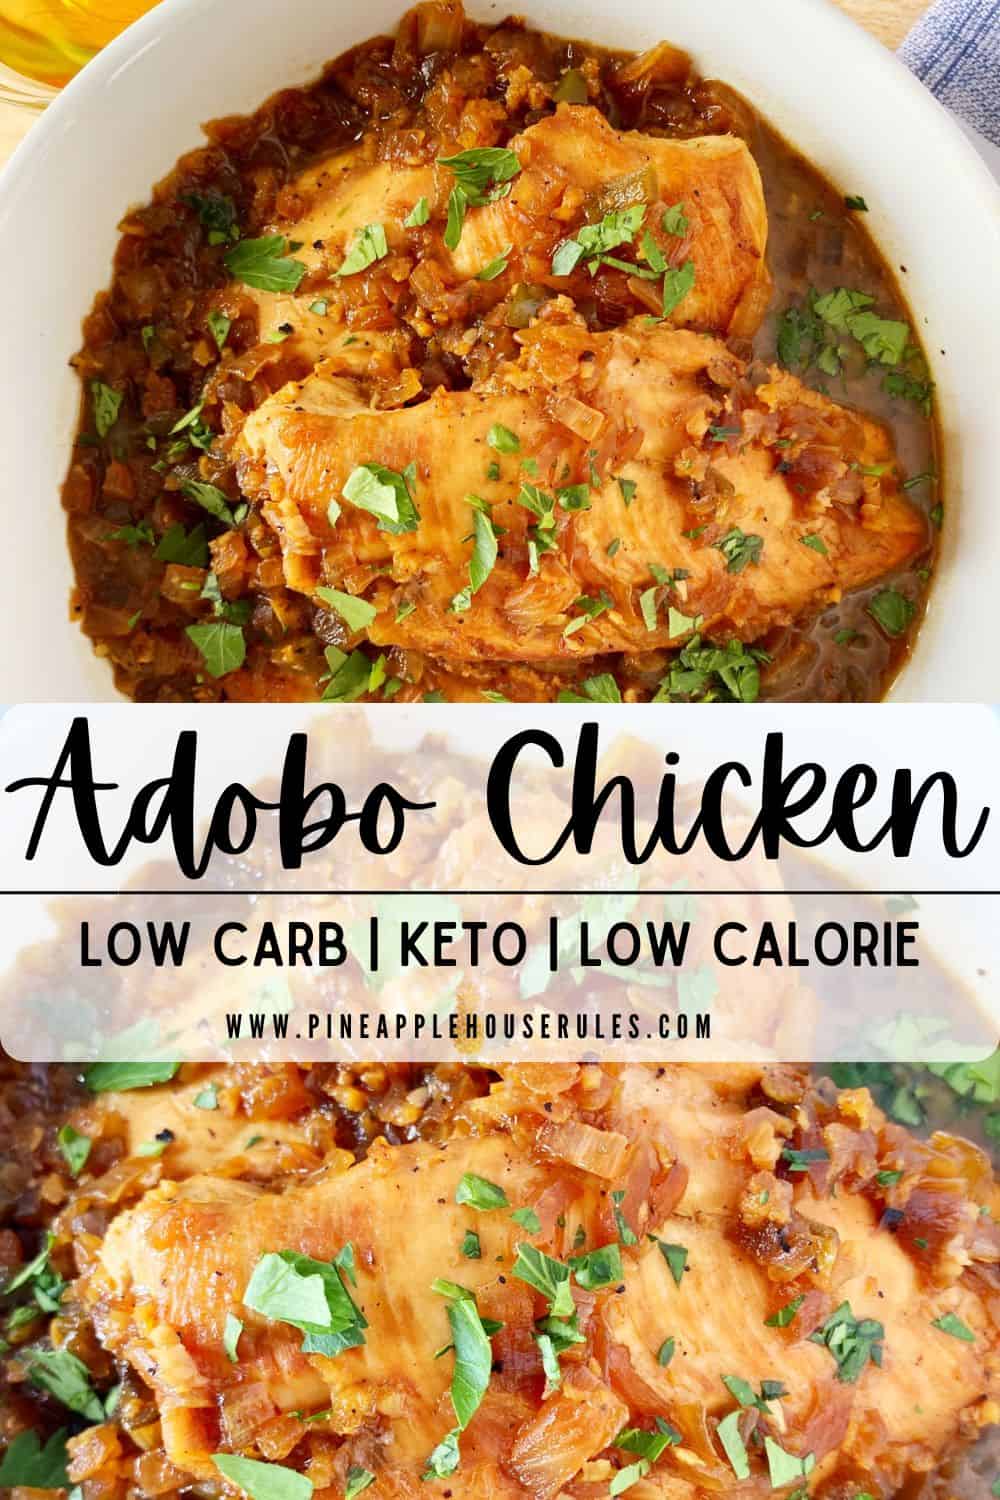 Adobo Chicken is an easy, traditional dish from the Philippines that's full of sweet, savory, and slightly spicy flavor! This recipe is an easy dinner that's healthy (only about 240 calories), low carb (11g), and high protein (38g) per serving. It's perfect for a busy weeknight! Adobo chicken Filipino | Adobo chicken | Adobo seasoning | Adobo sauce | Adobo | adobo recipe | easy dinner recipes | easy chicken recipes | low carb recipes | low calorie recipes | low carb dinner | low carb meals